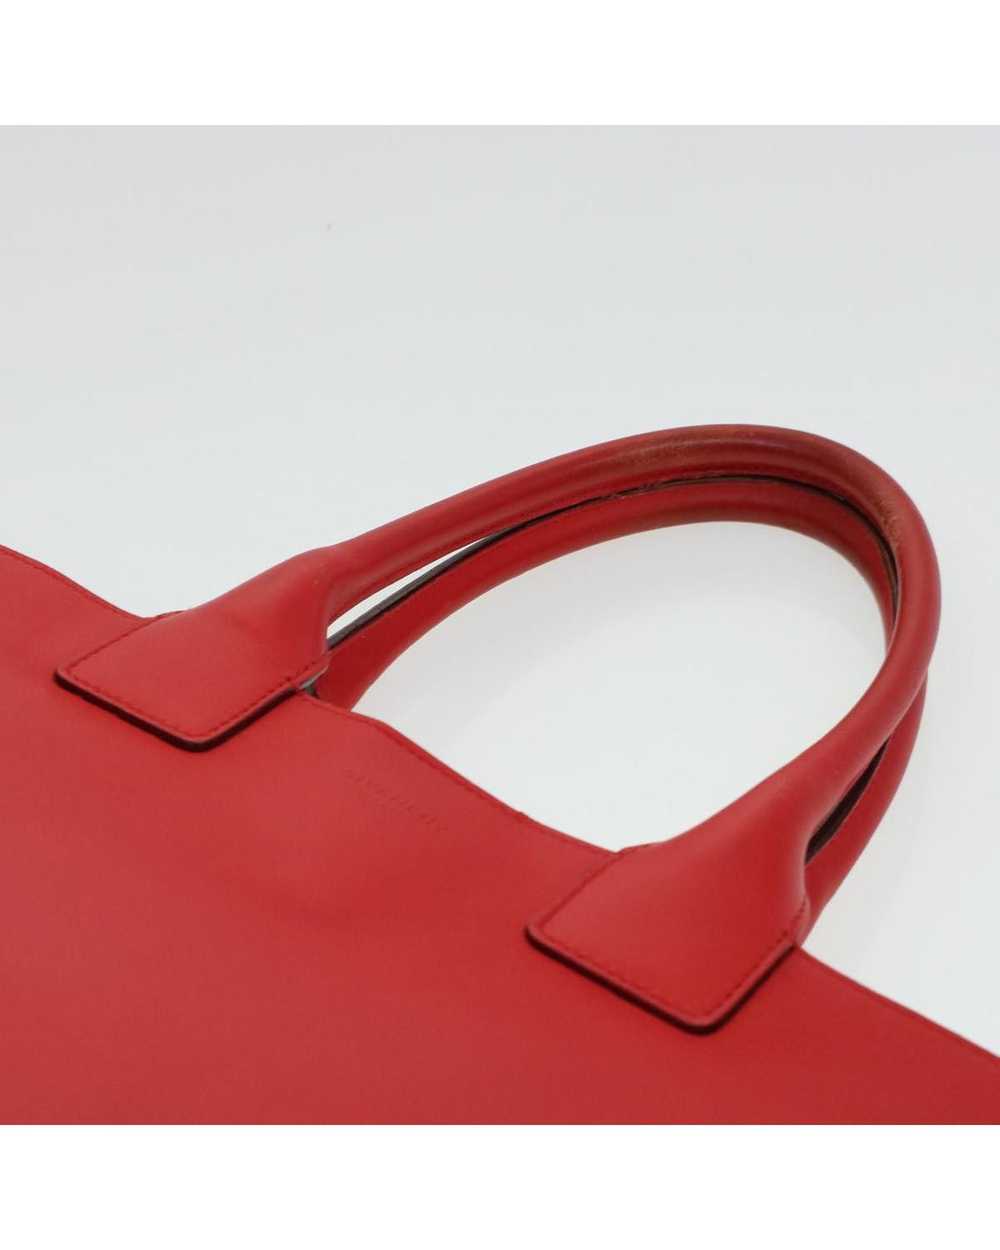 Givenchy Practical and Elegant Givenchy Red Leath… - image 8